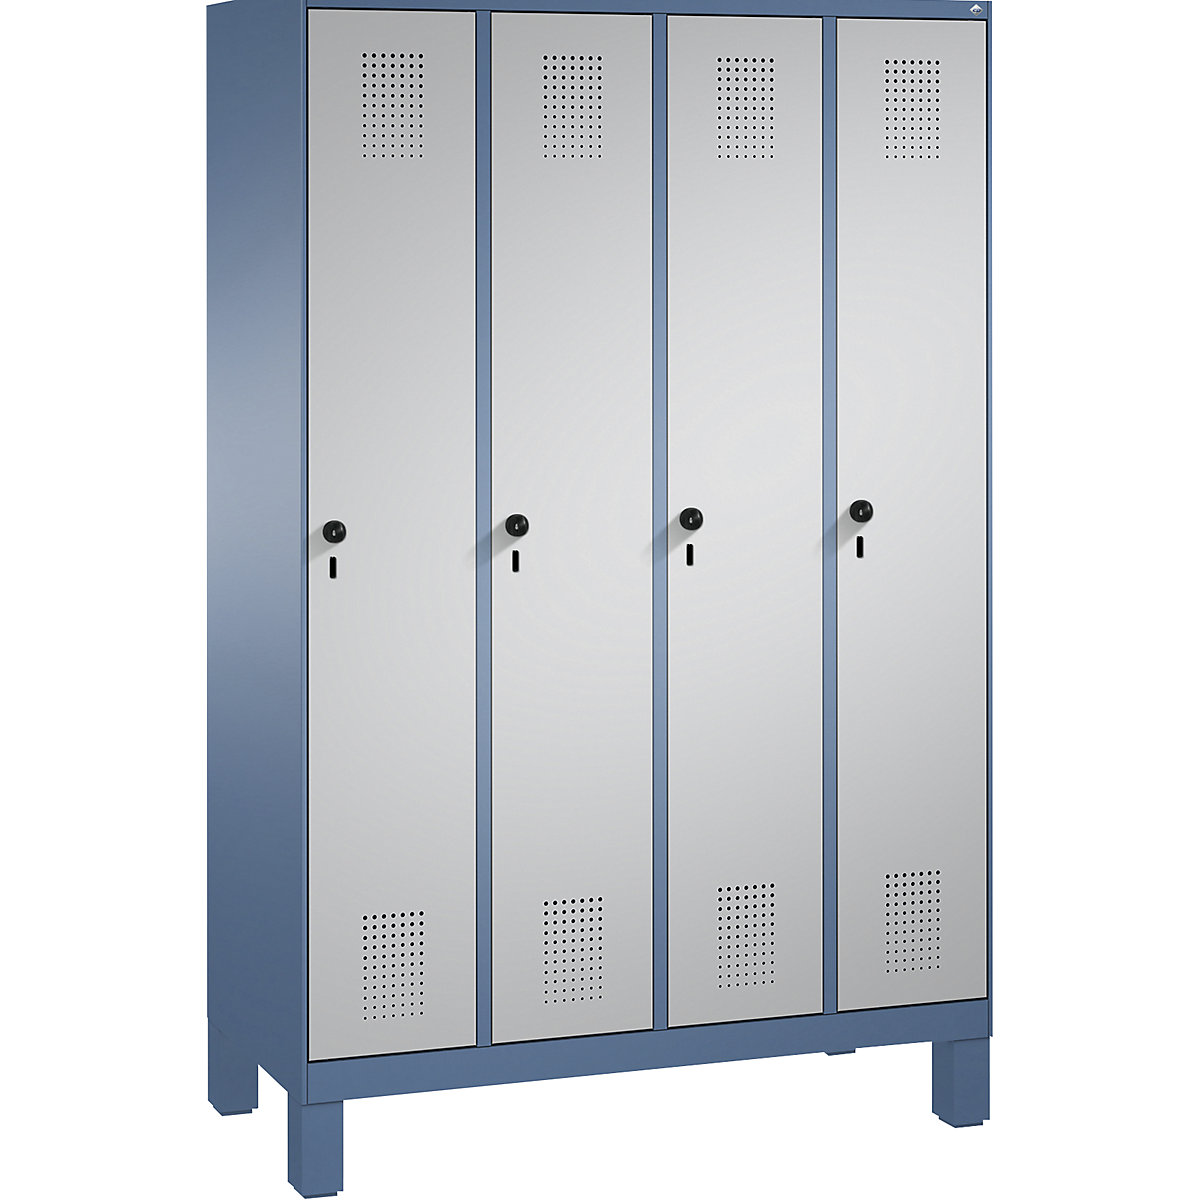 EVOLO cloakroom locker, with feet – C+P, 4 compartments, compartment width 300 mm, distant blue / white aluminium-10